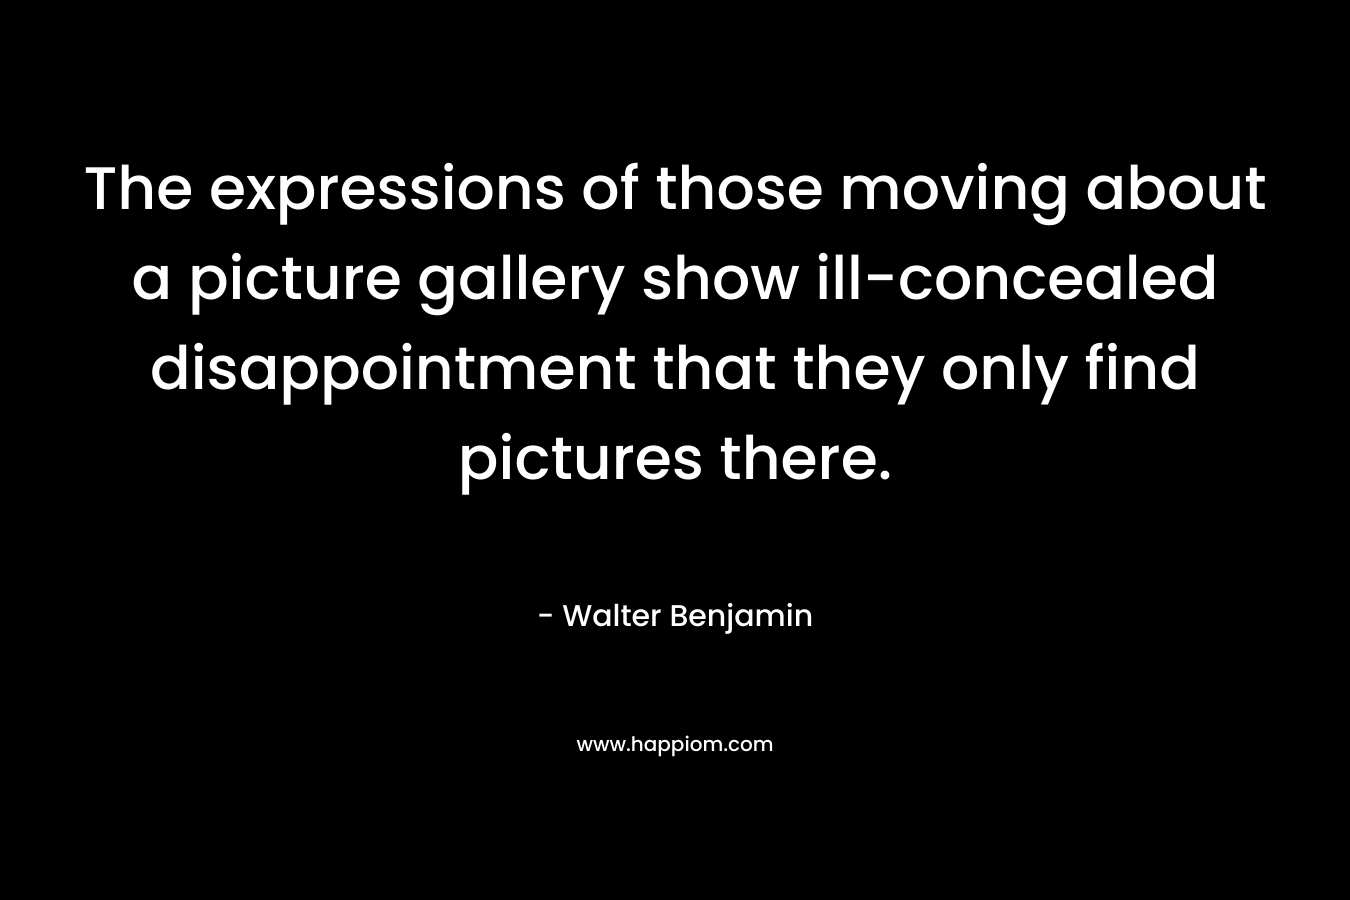 The expressions of those moving about a picture gallery show ill-concealed disappointment that they only find pictures there. – Walter Benjamin